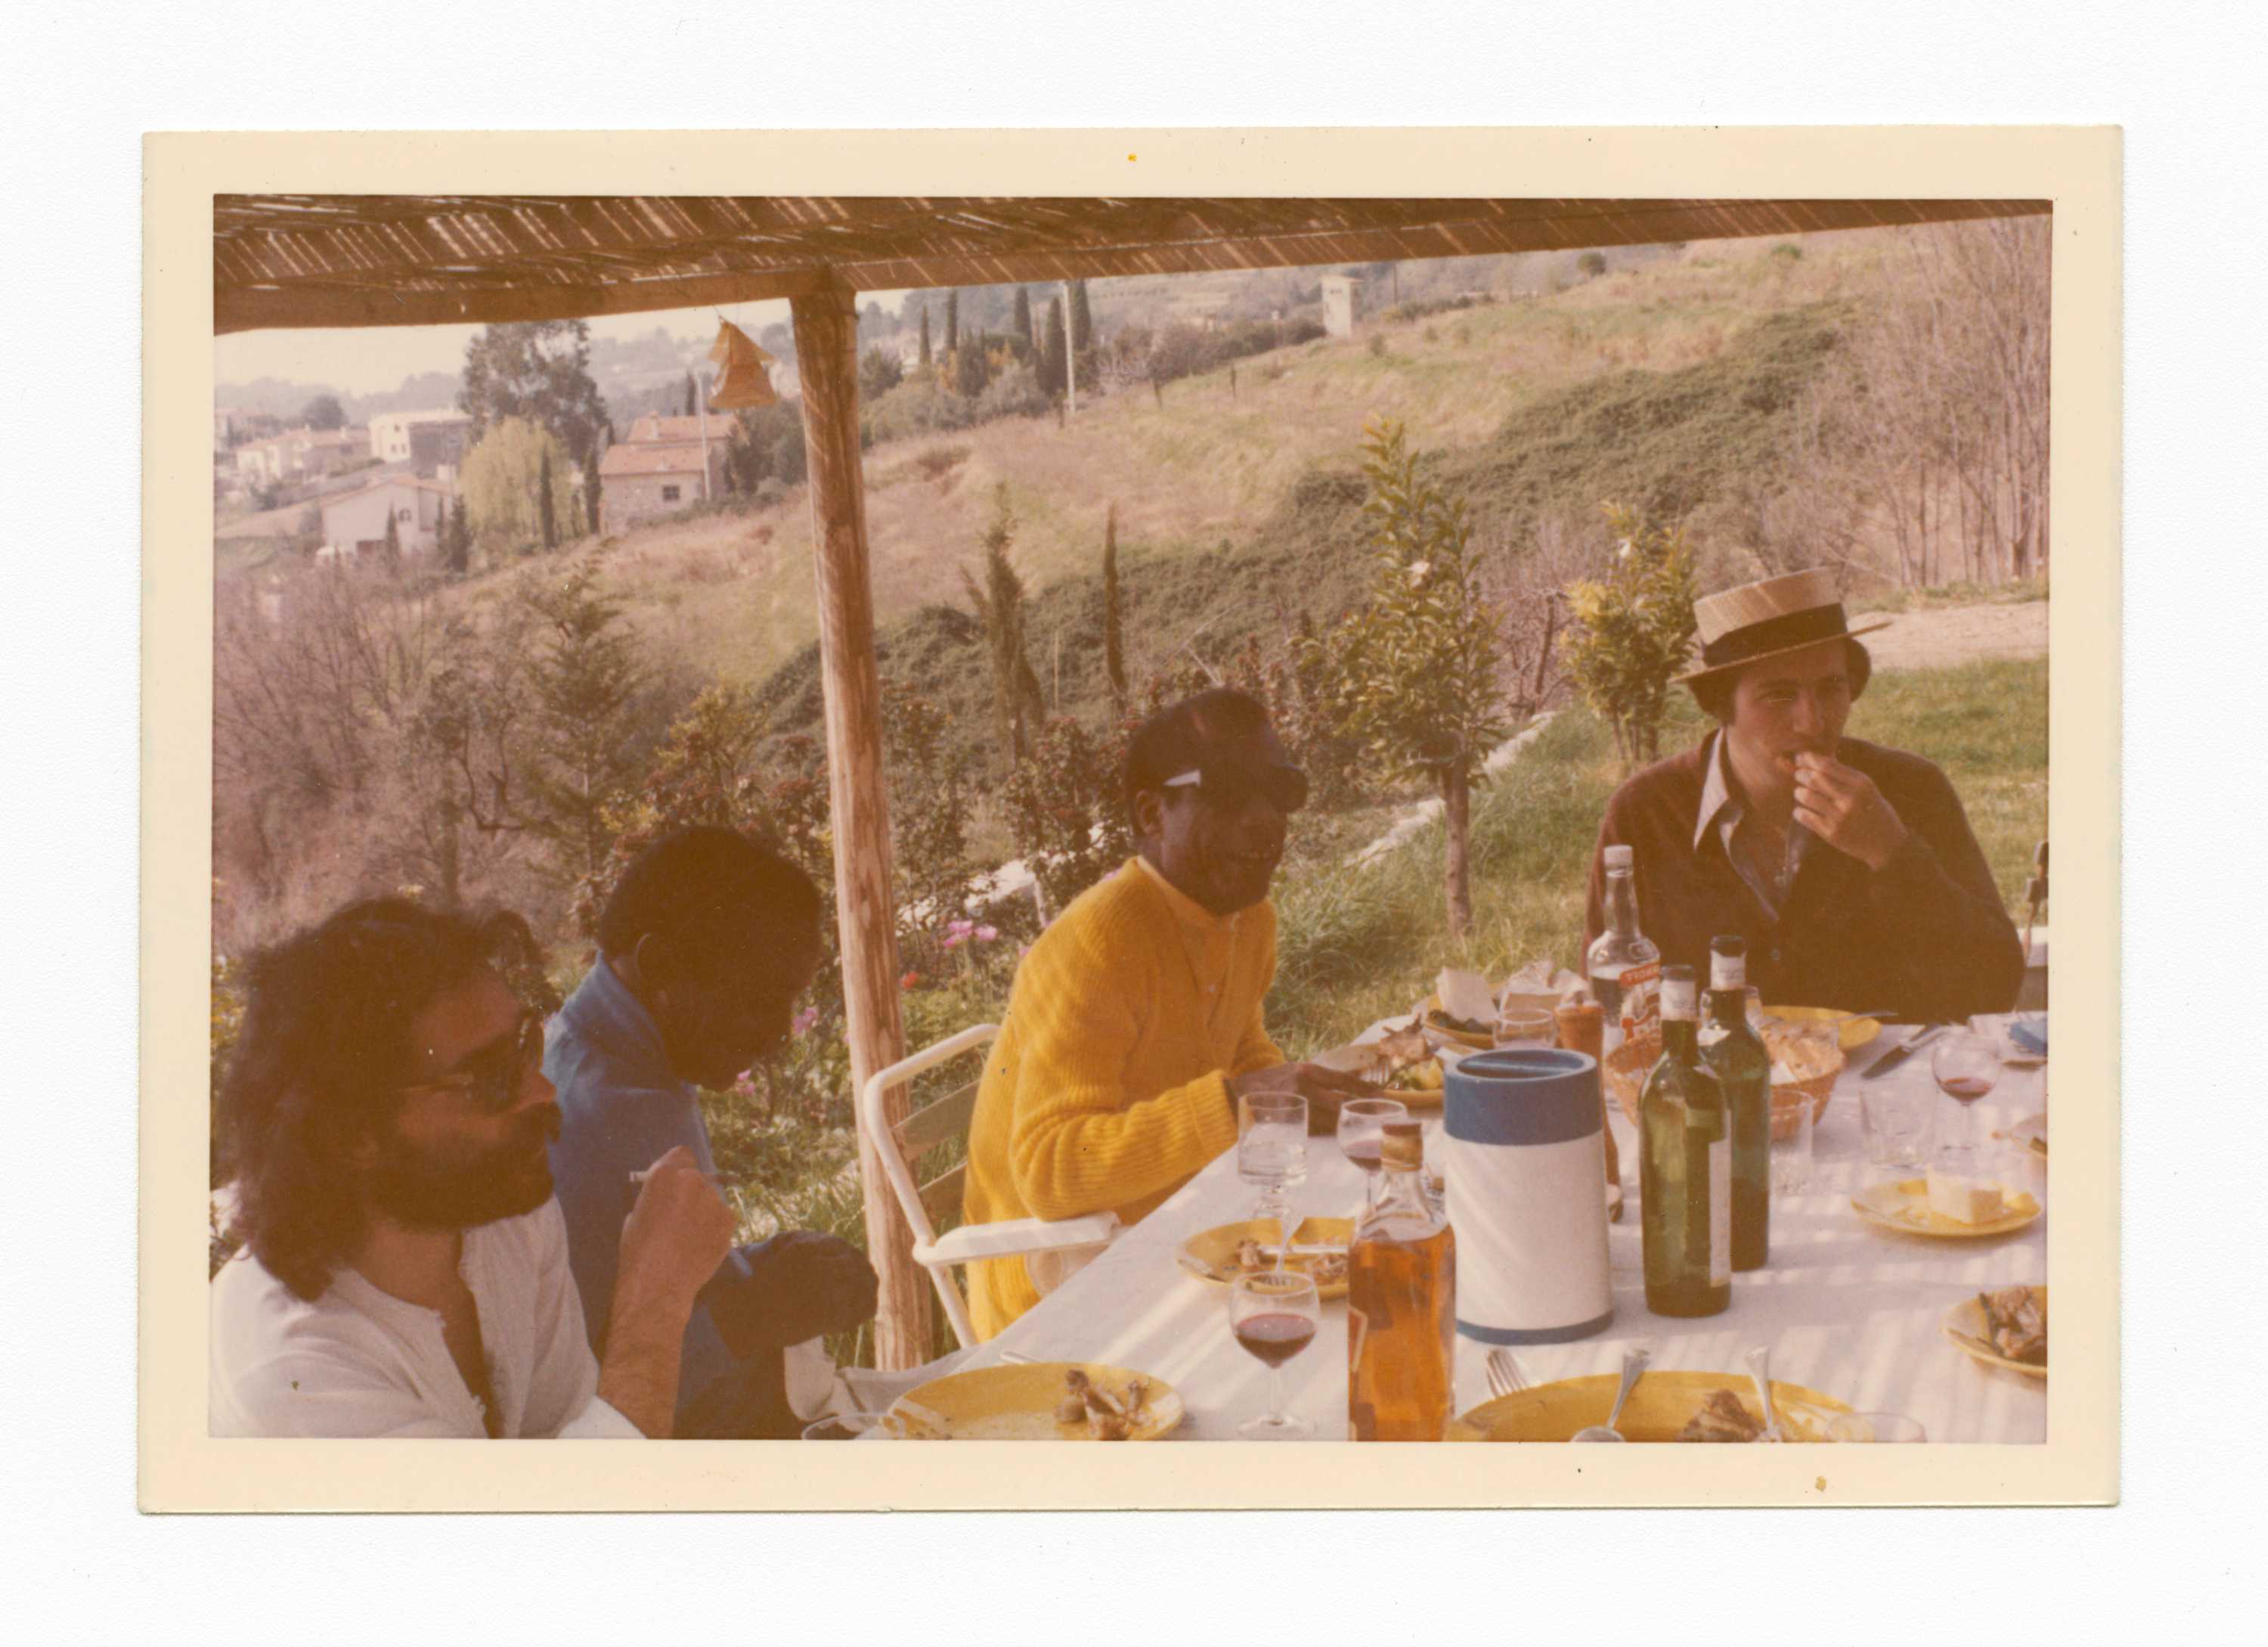 A colored, but faded photograph of James Baldwin and three friends sitting outside around a table.